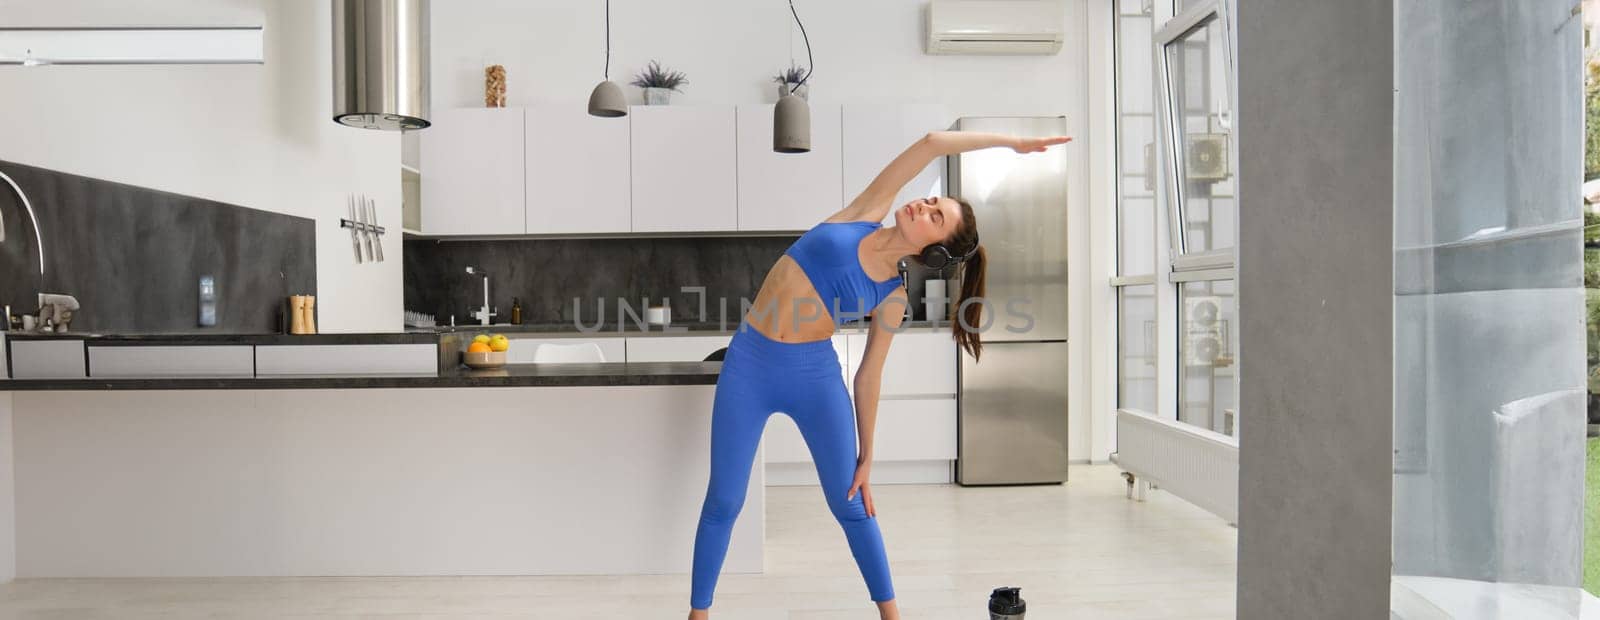 Image of young woman doing fitness exercises at home, stretching her body, bending sideways, doing aerobics workout in living room, standing on rubber mat.